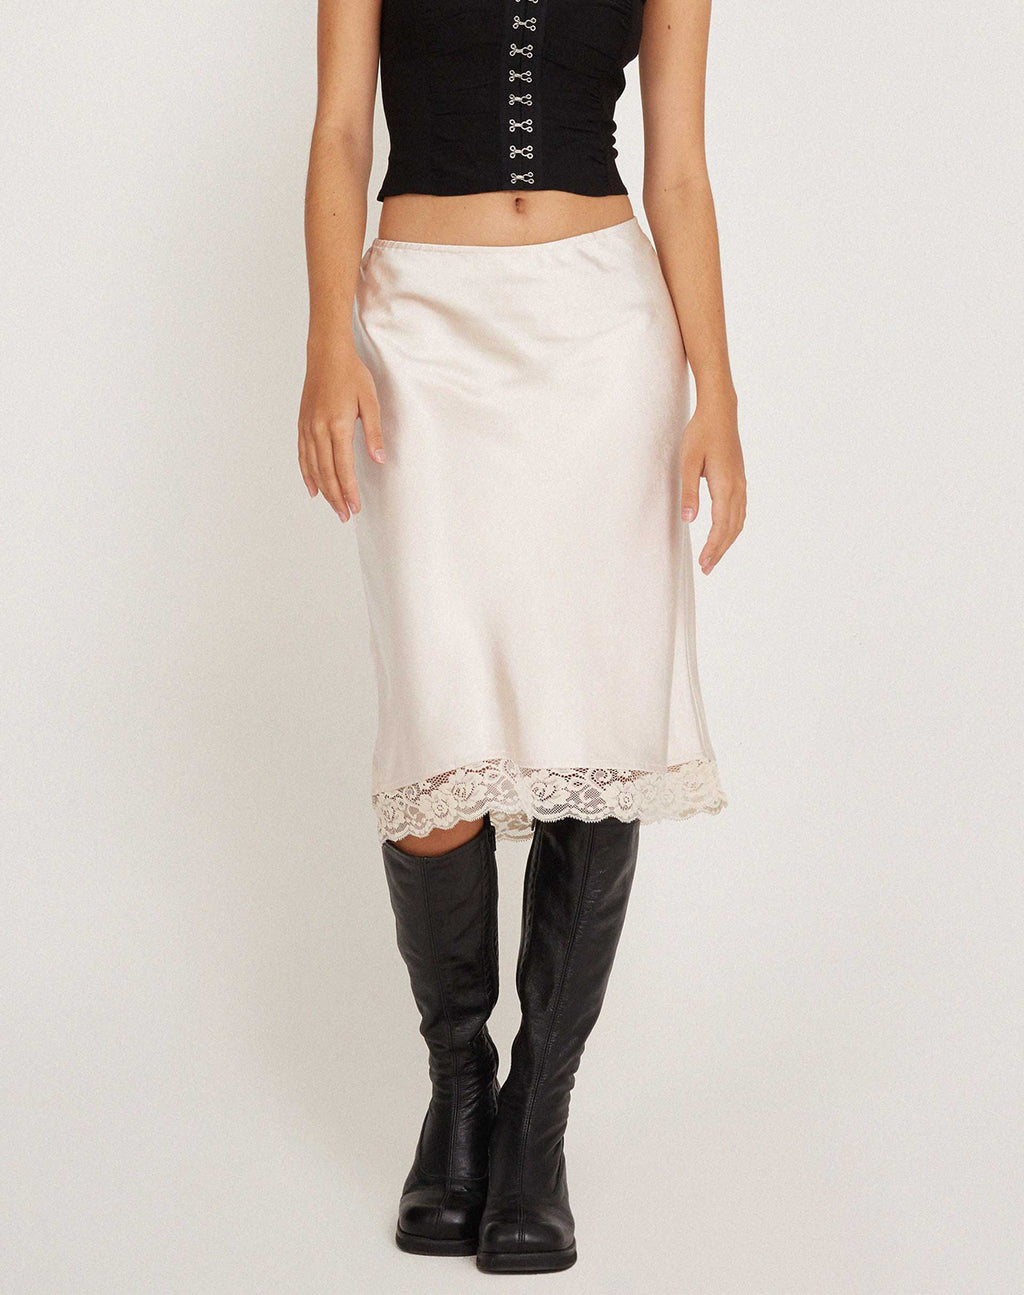 Resira Midi Skirt in Satin Pearled Ivory with Lace